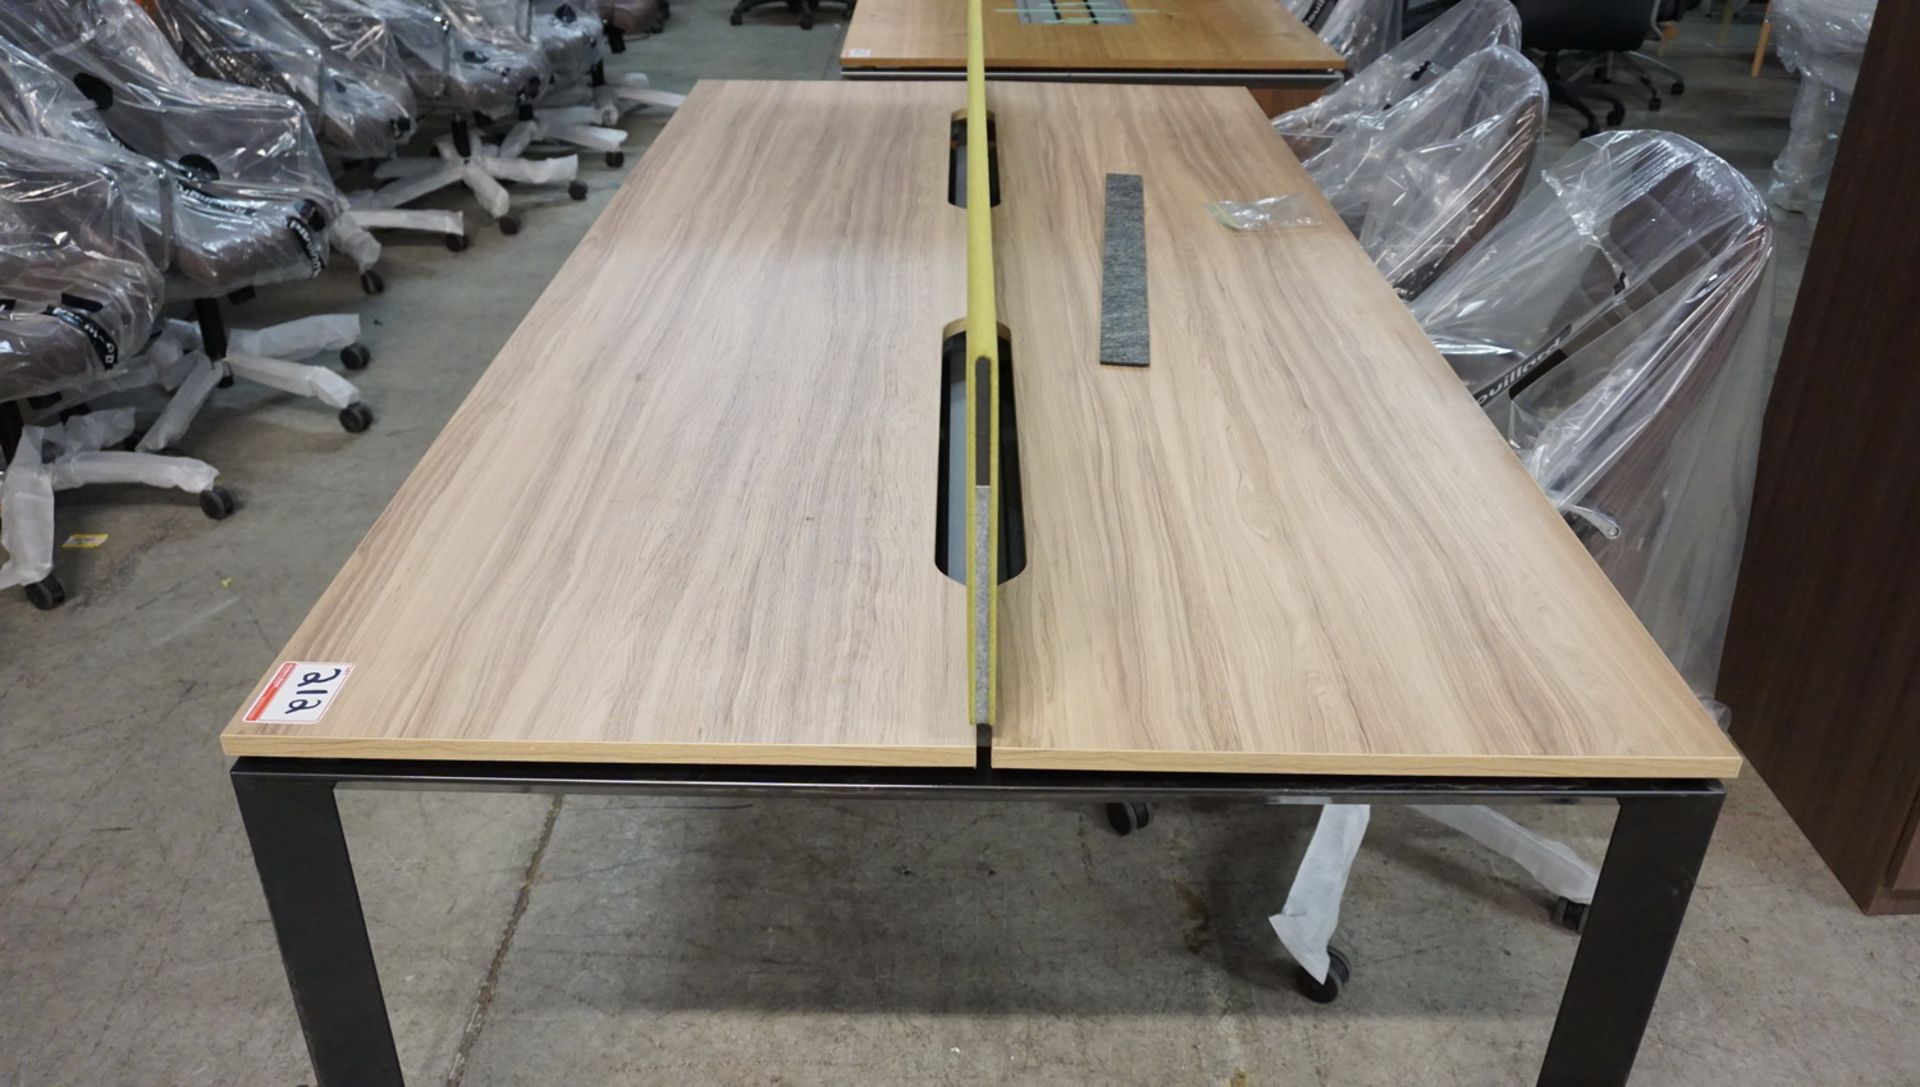 STEELCASE 14-573 4' X 8' 2-SIDED BENCH SYSTEM W/ GREEN DIVIDER - Image 2 of 2